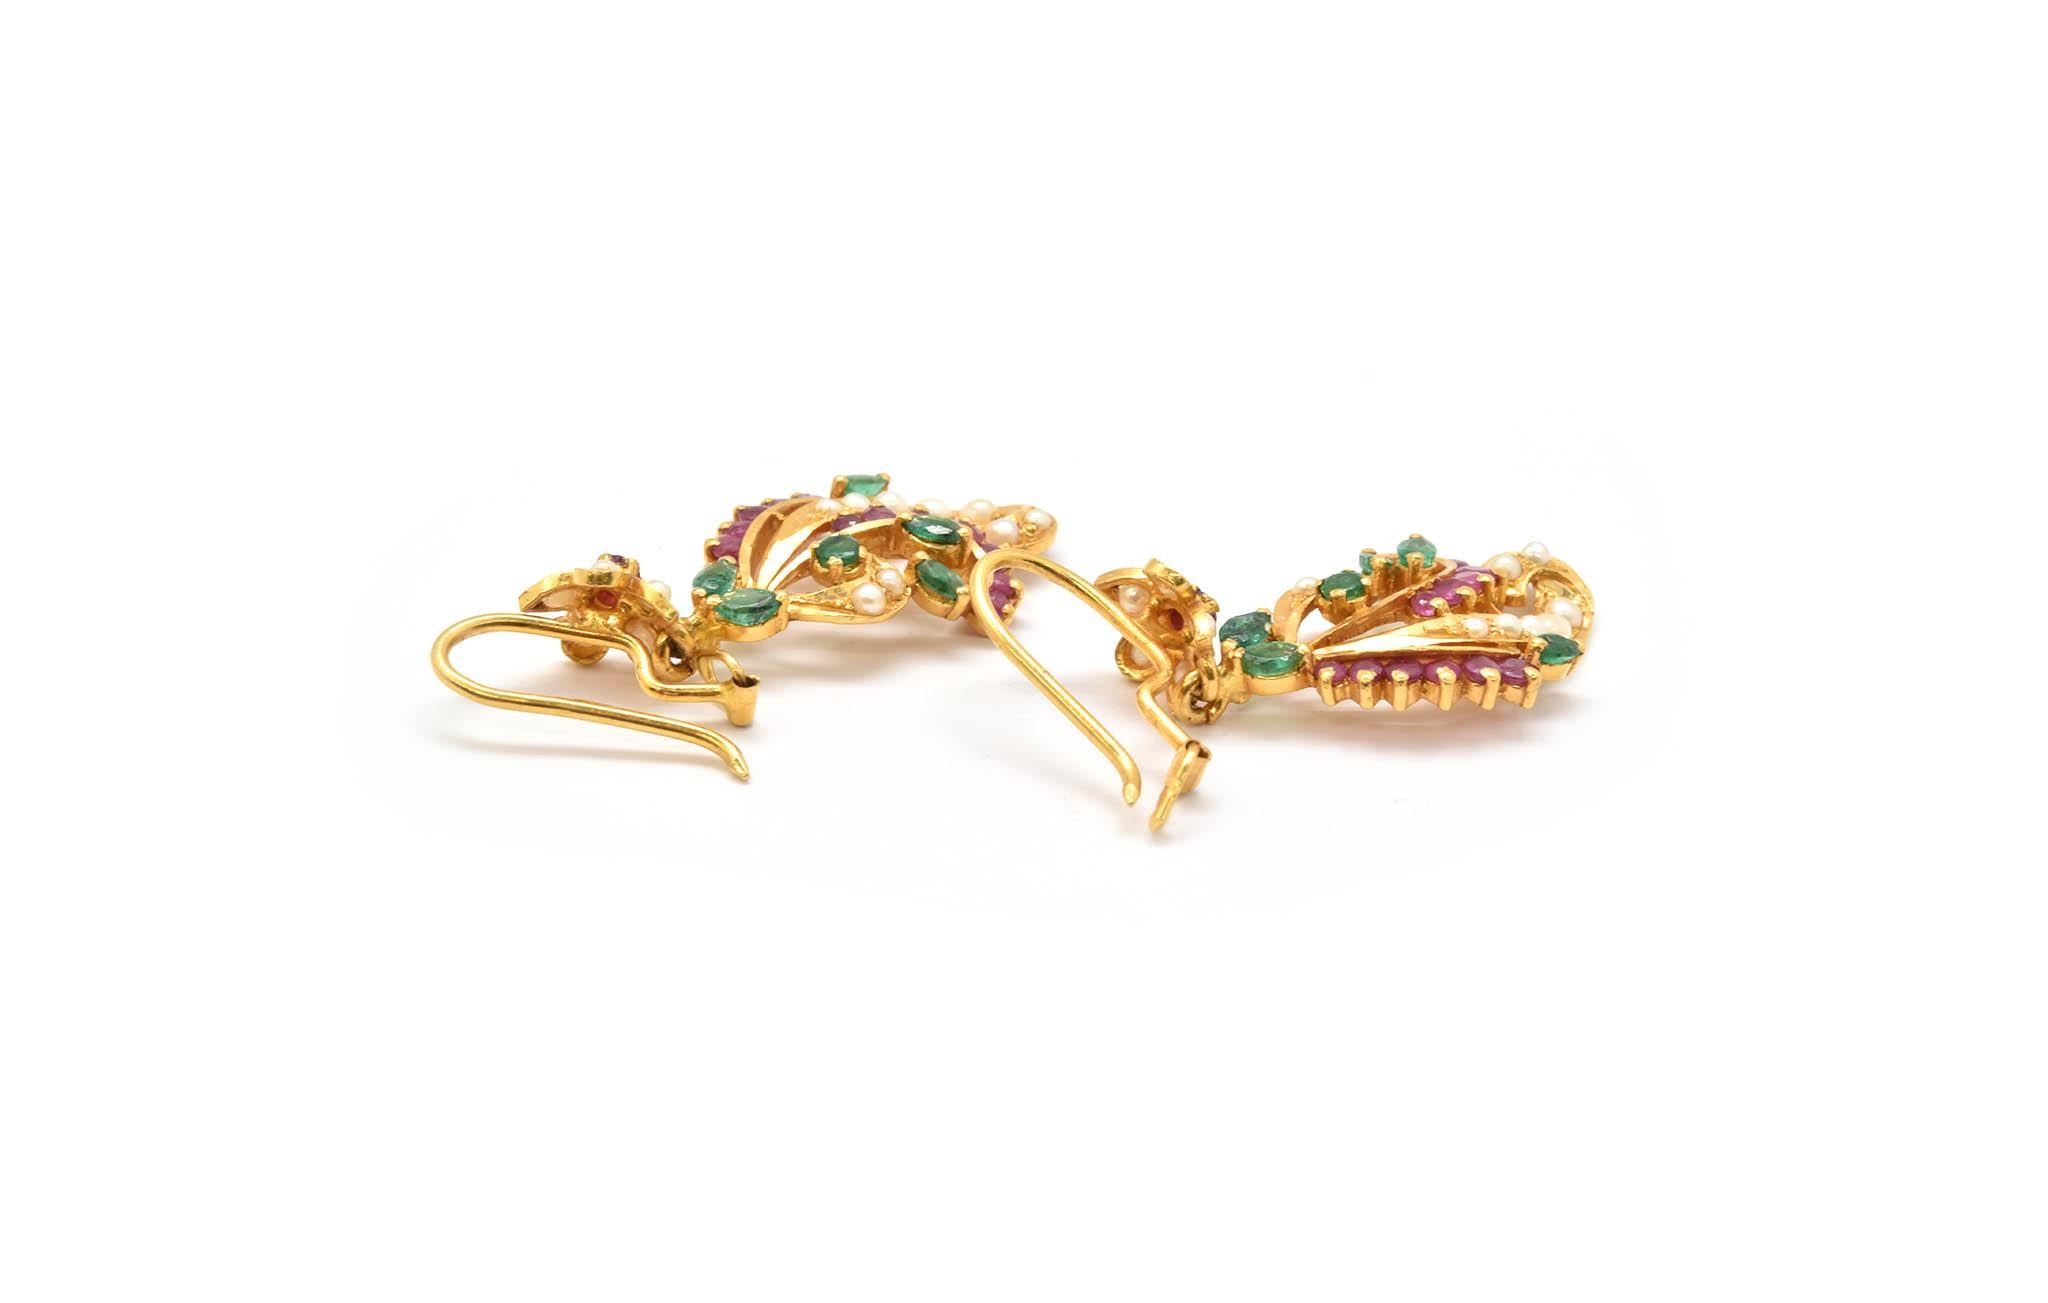 Contemporary Vintage 22 Karat Gold Emerald, Ruby and Pearl Dangle Earrings, 11.25 Grams